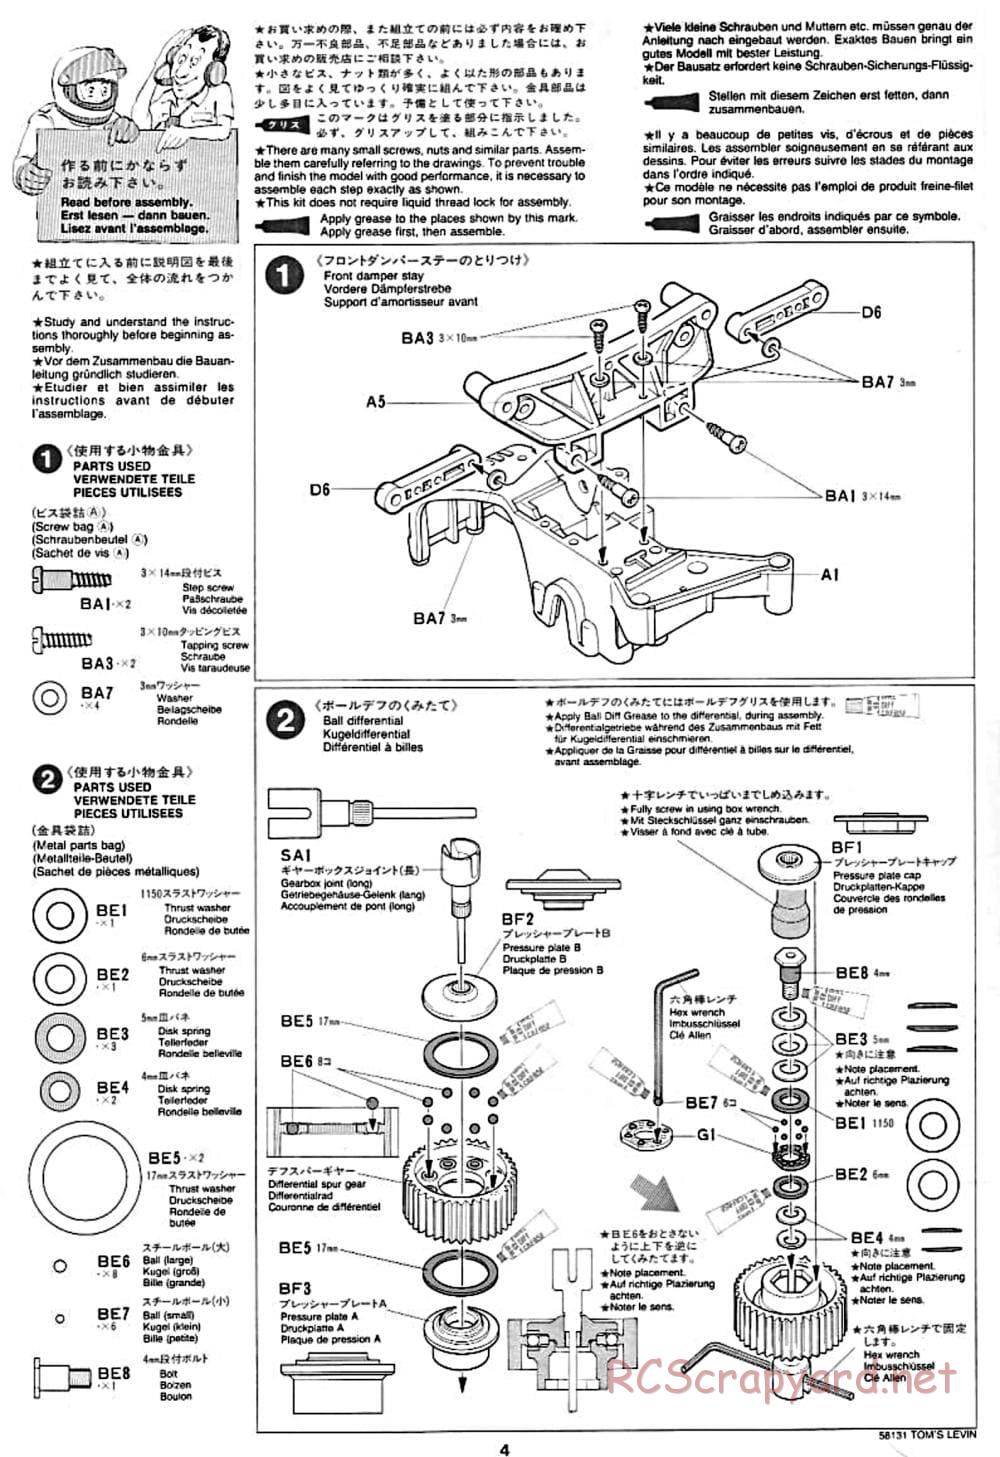 Tamiya - Toyota Tom's Levin - FF-01 Chassis - Manual - Page 4